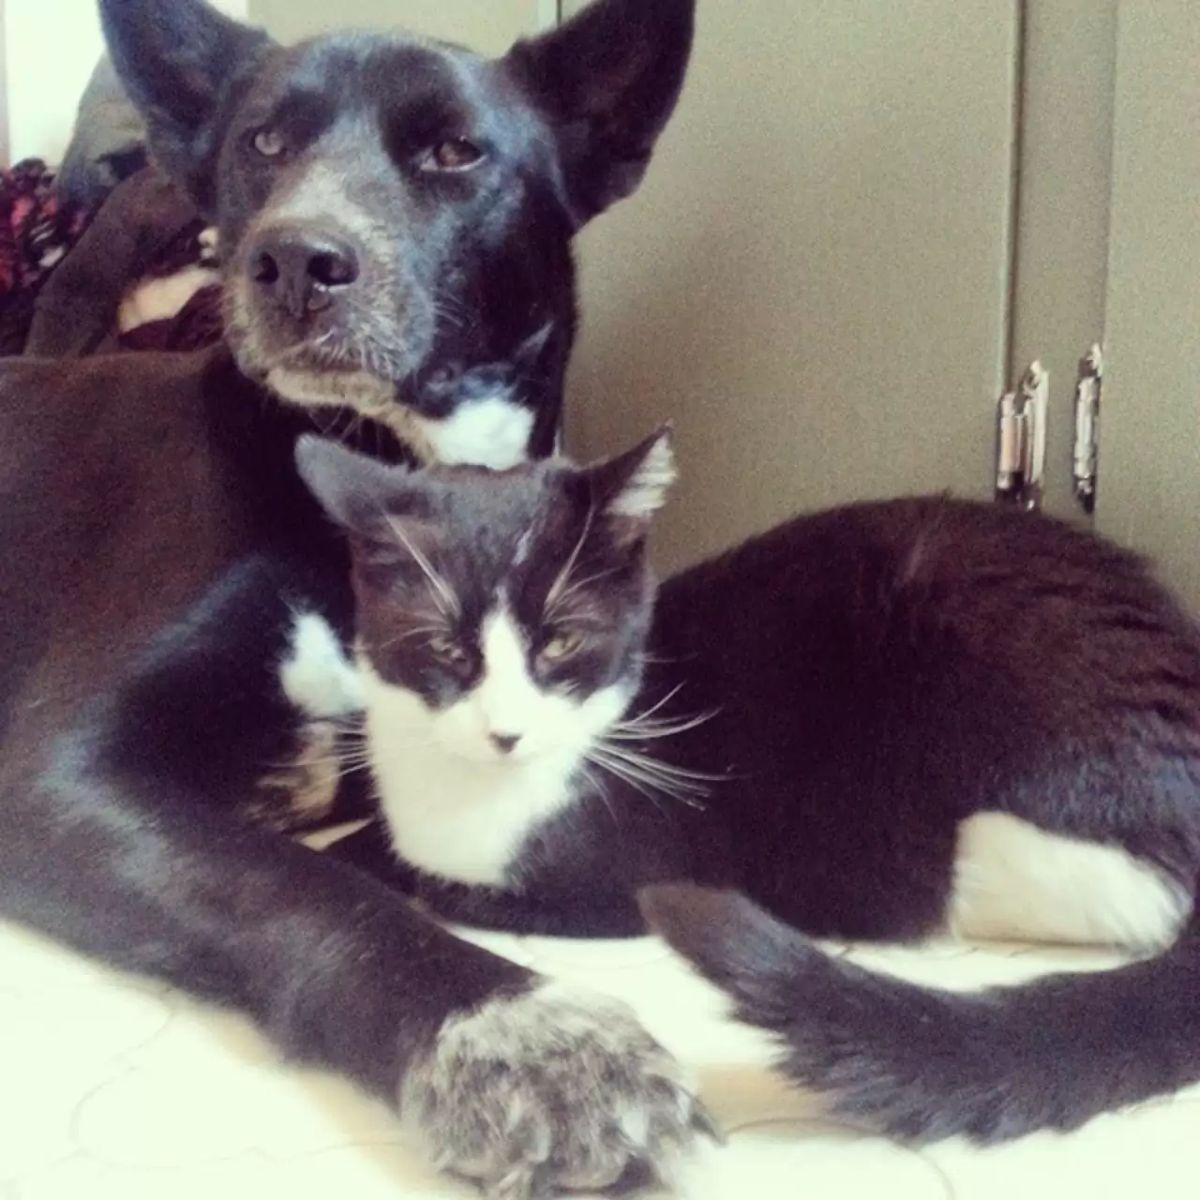 black and white dog and black and white cat together with the same tuxedo pattern